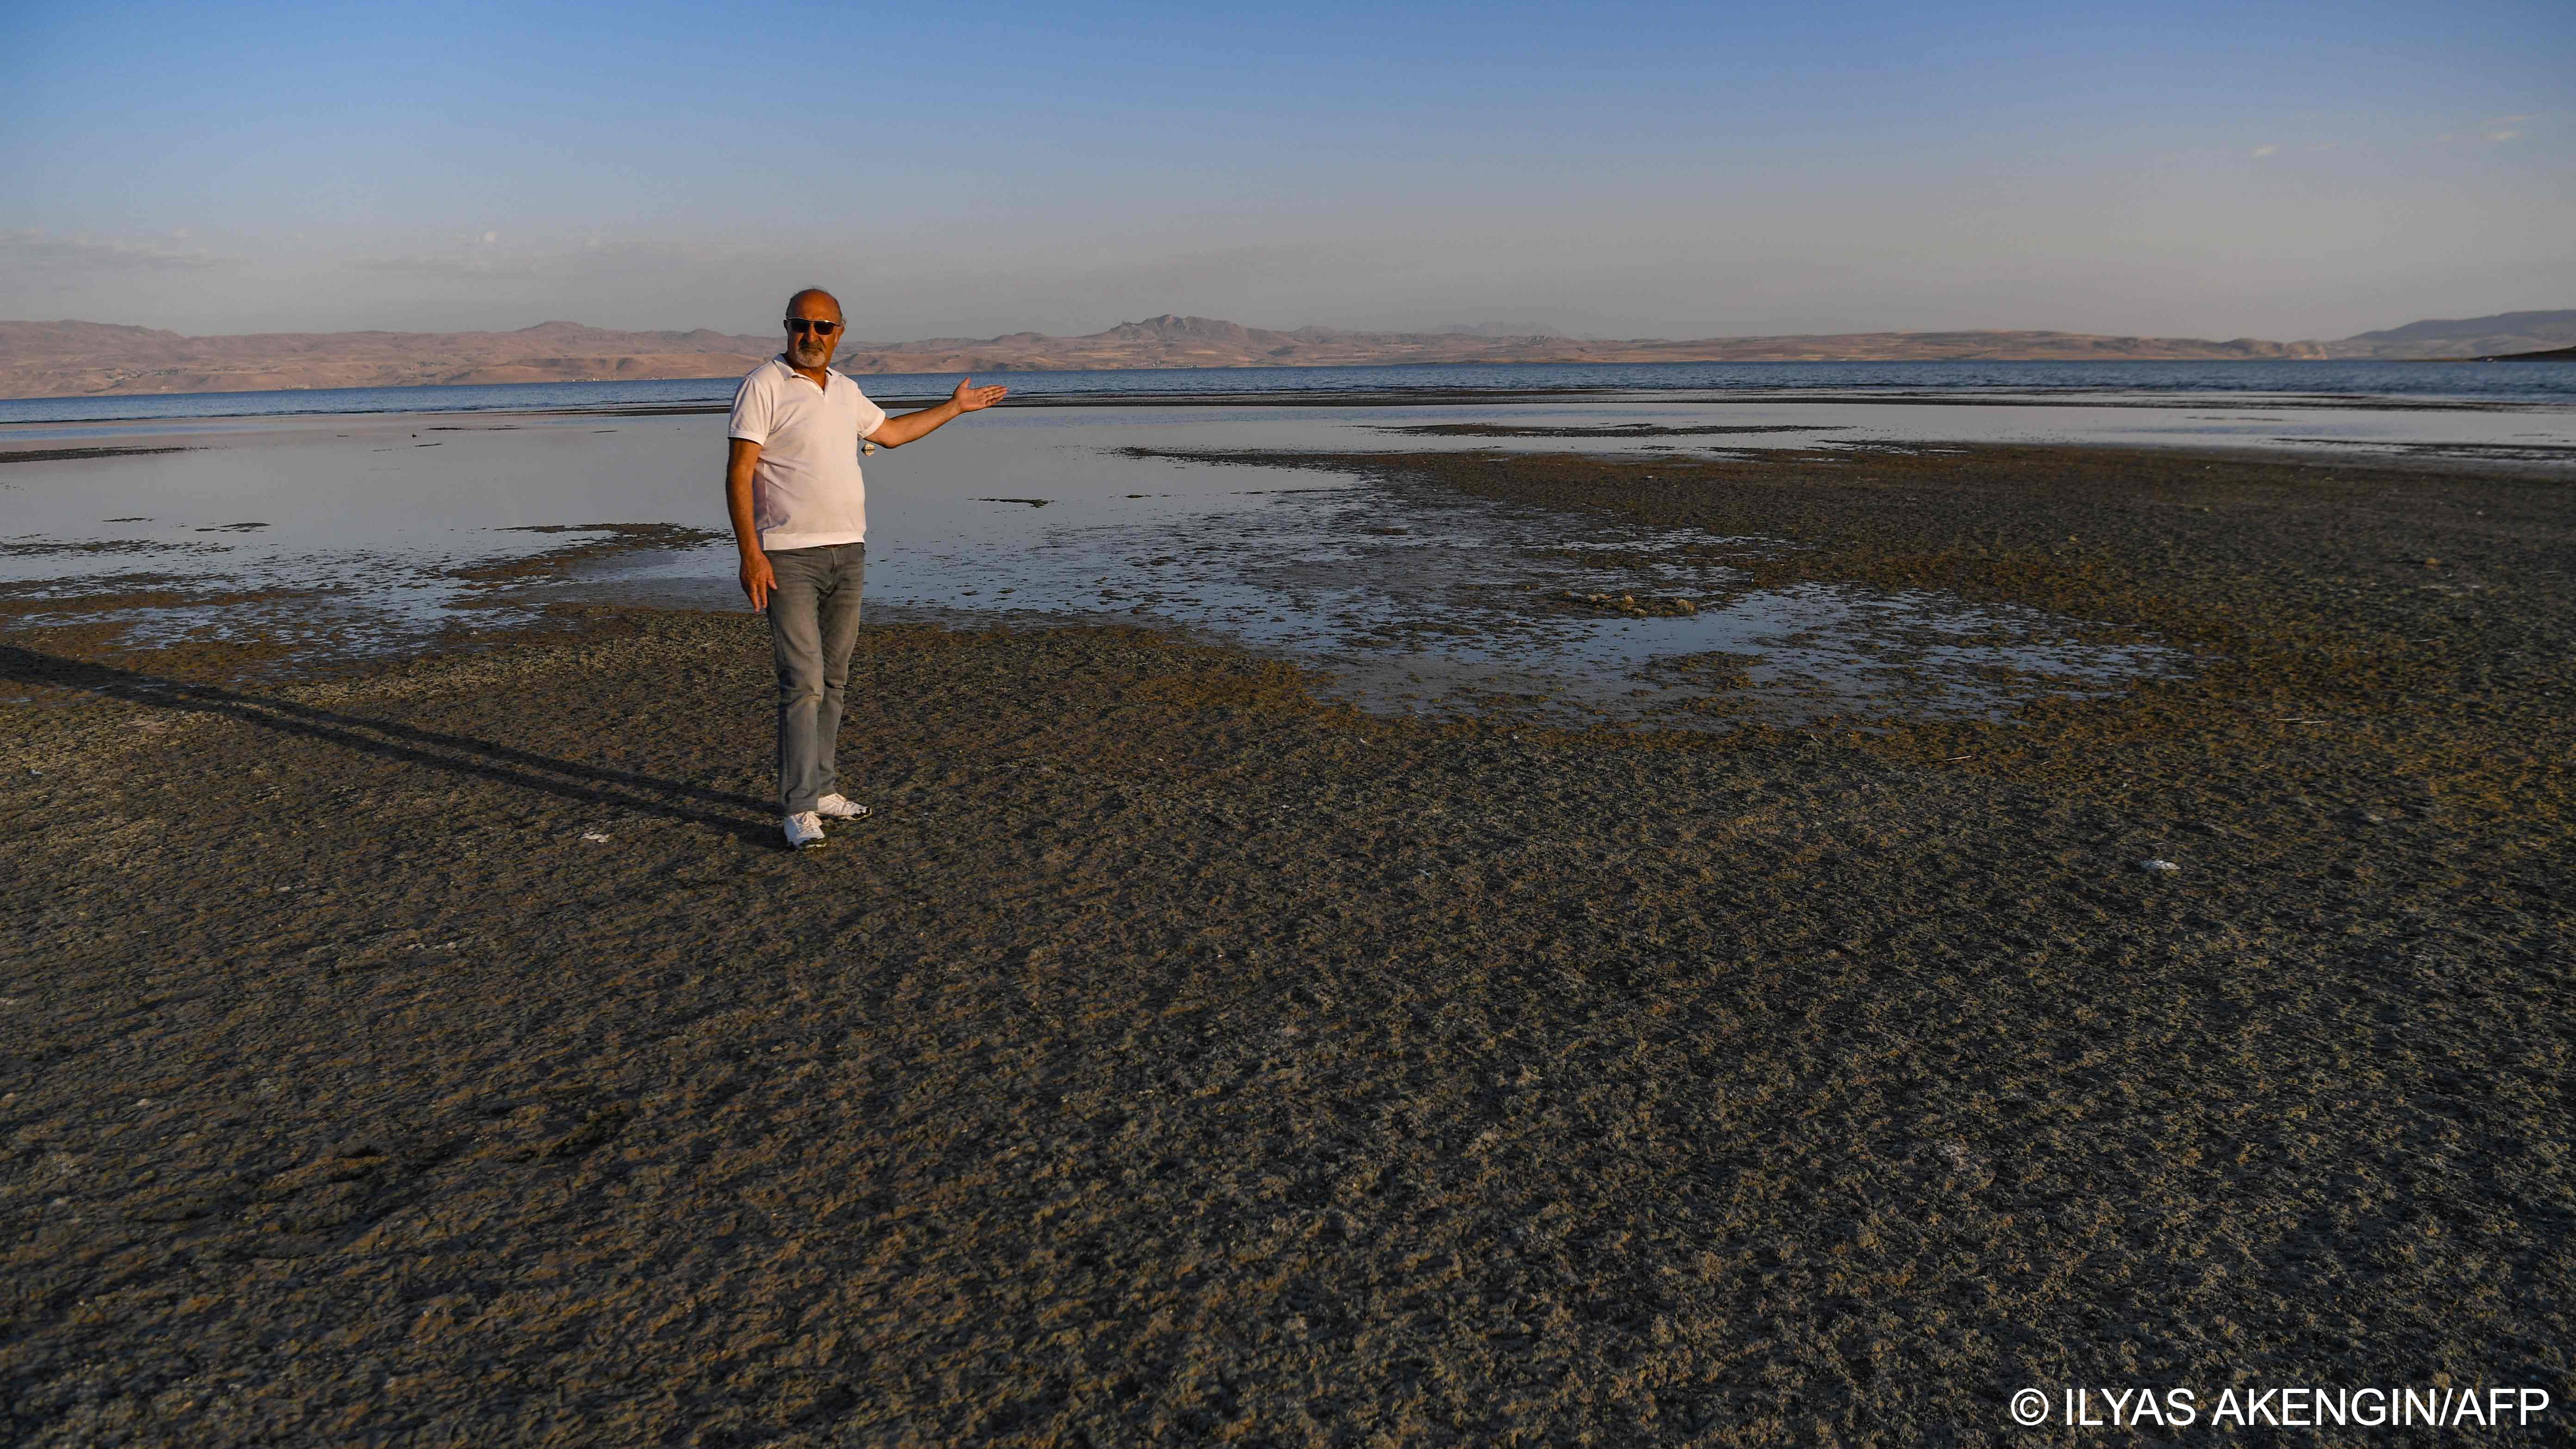 Kalcik stands on a dry bank of Lake Van, where the waters have receded by around four kilometres (image: ILYAS AKENGIN/AFP)